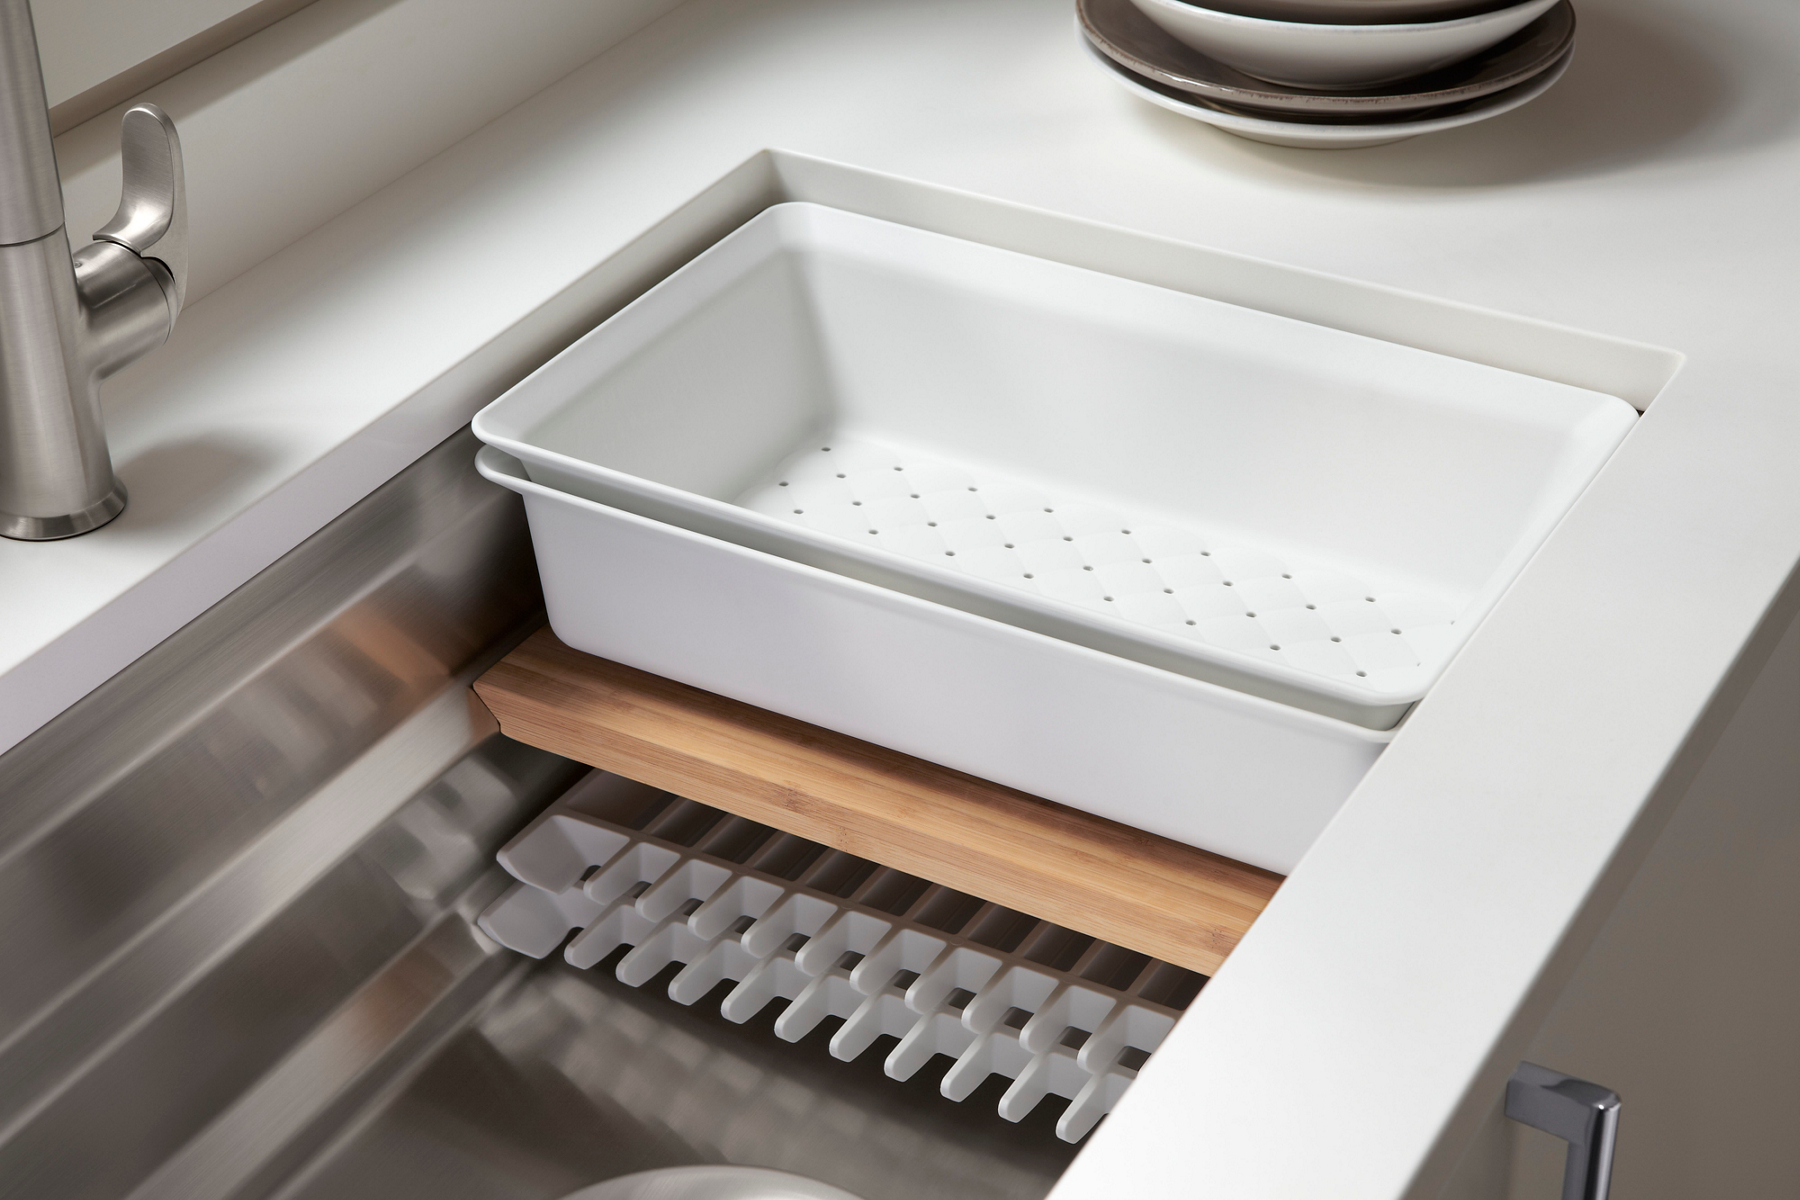 A KOHLER Prolific sink, outfitted with sliding bin, colander, cutting board and drain grates.